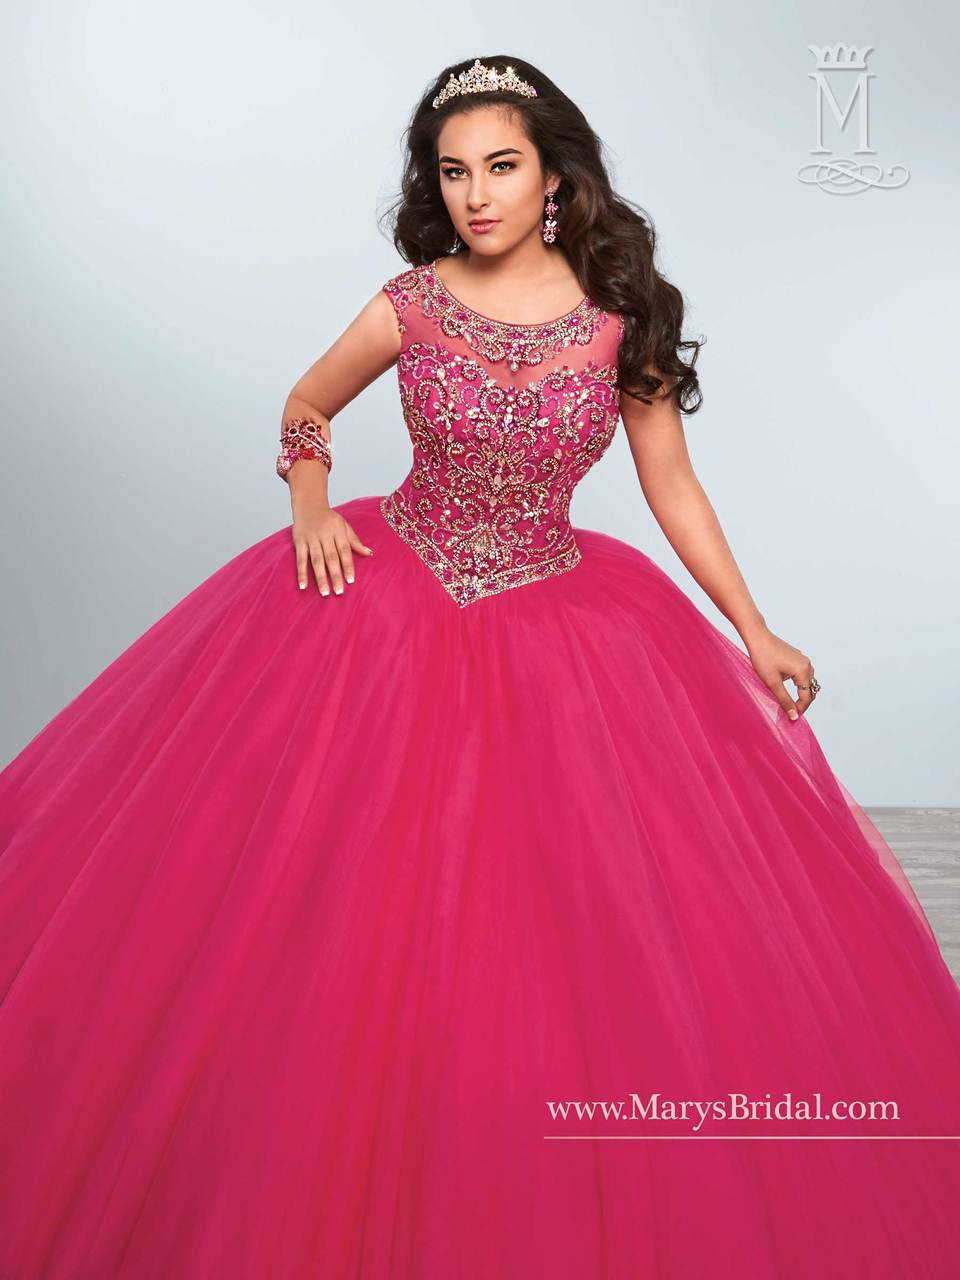 mary's quince dresses